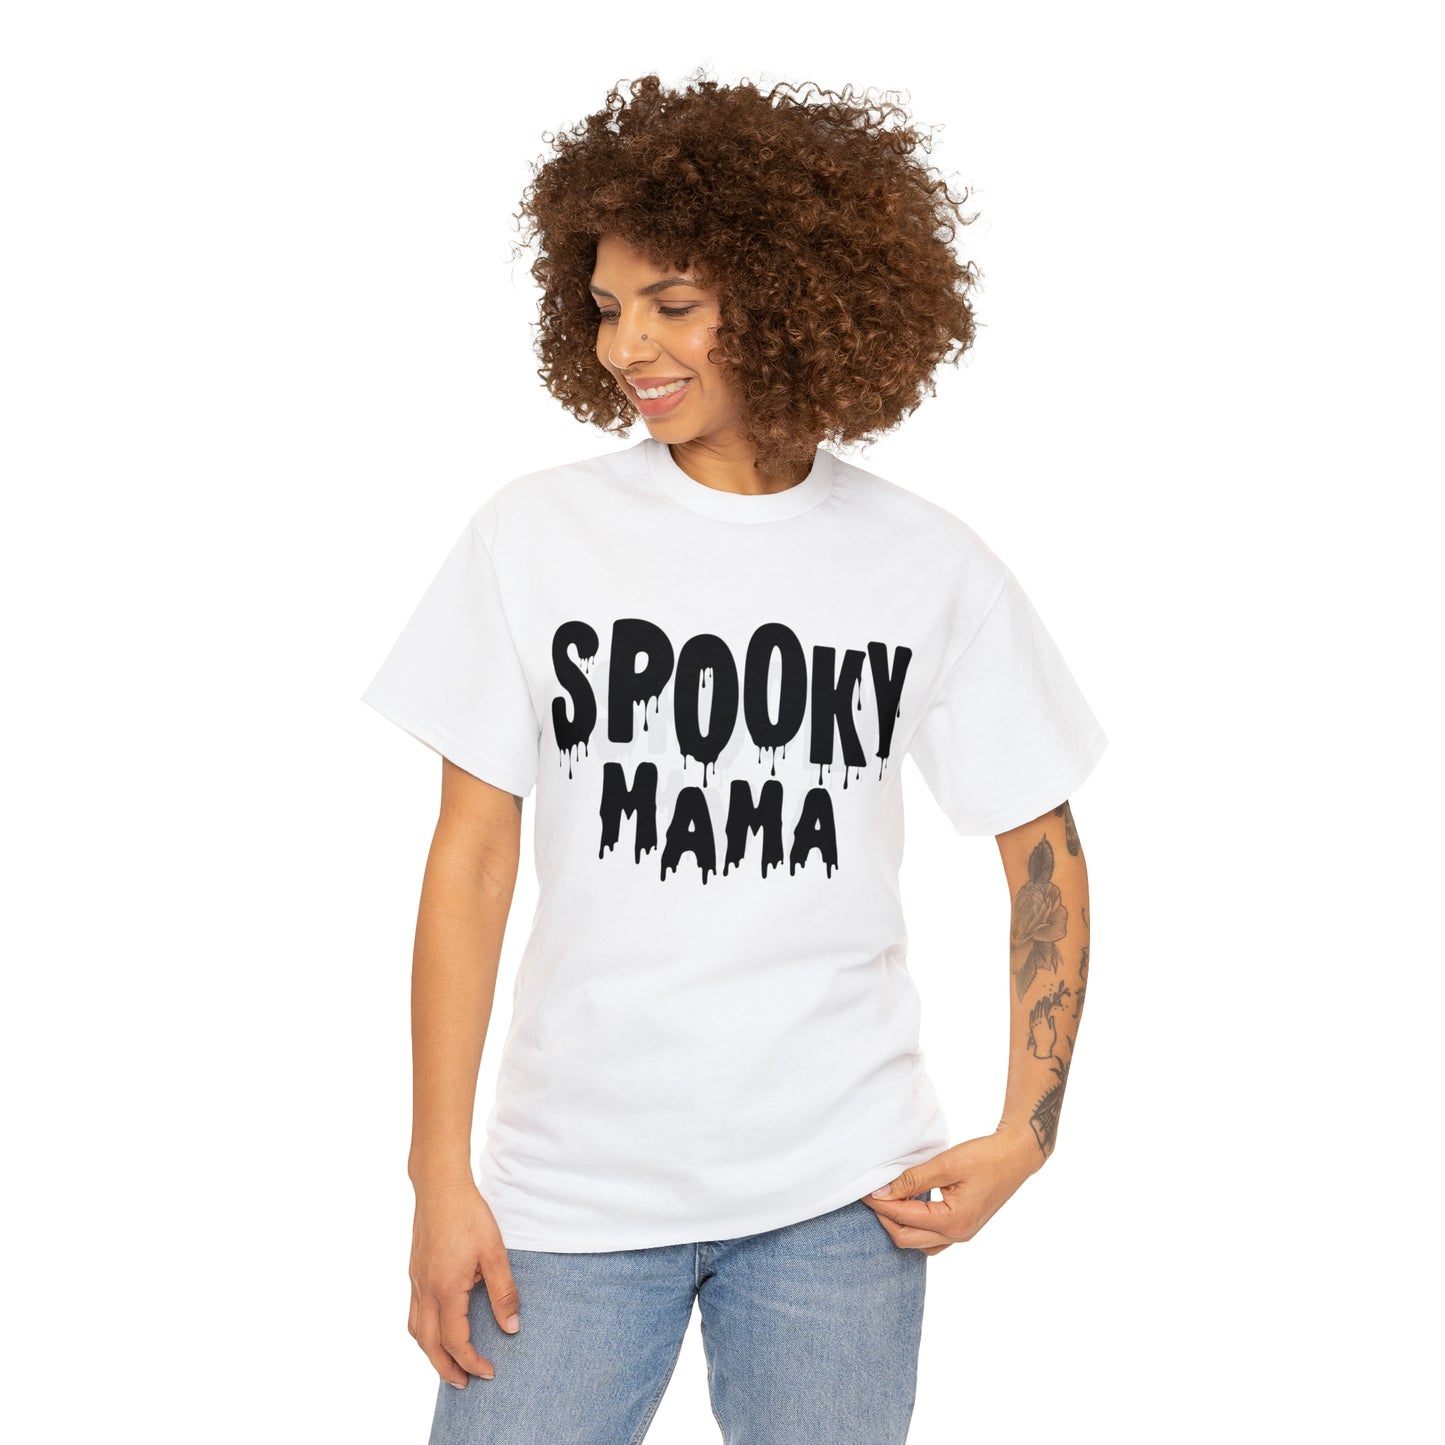 Get into the Halloween spirit with our "Spooky Mama" Halloween T-Shirt!